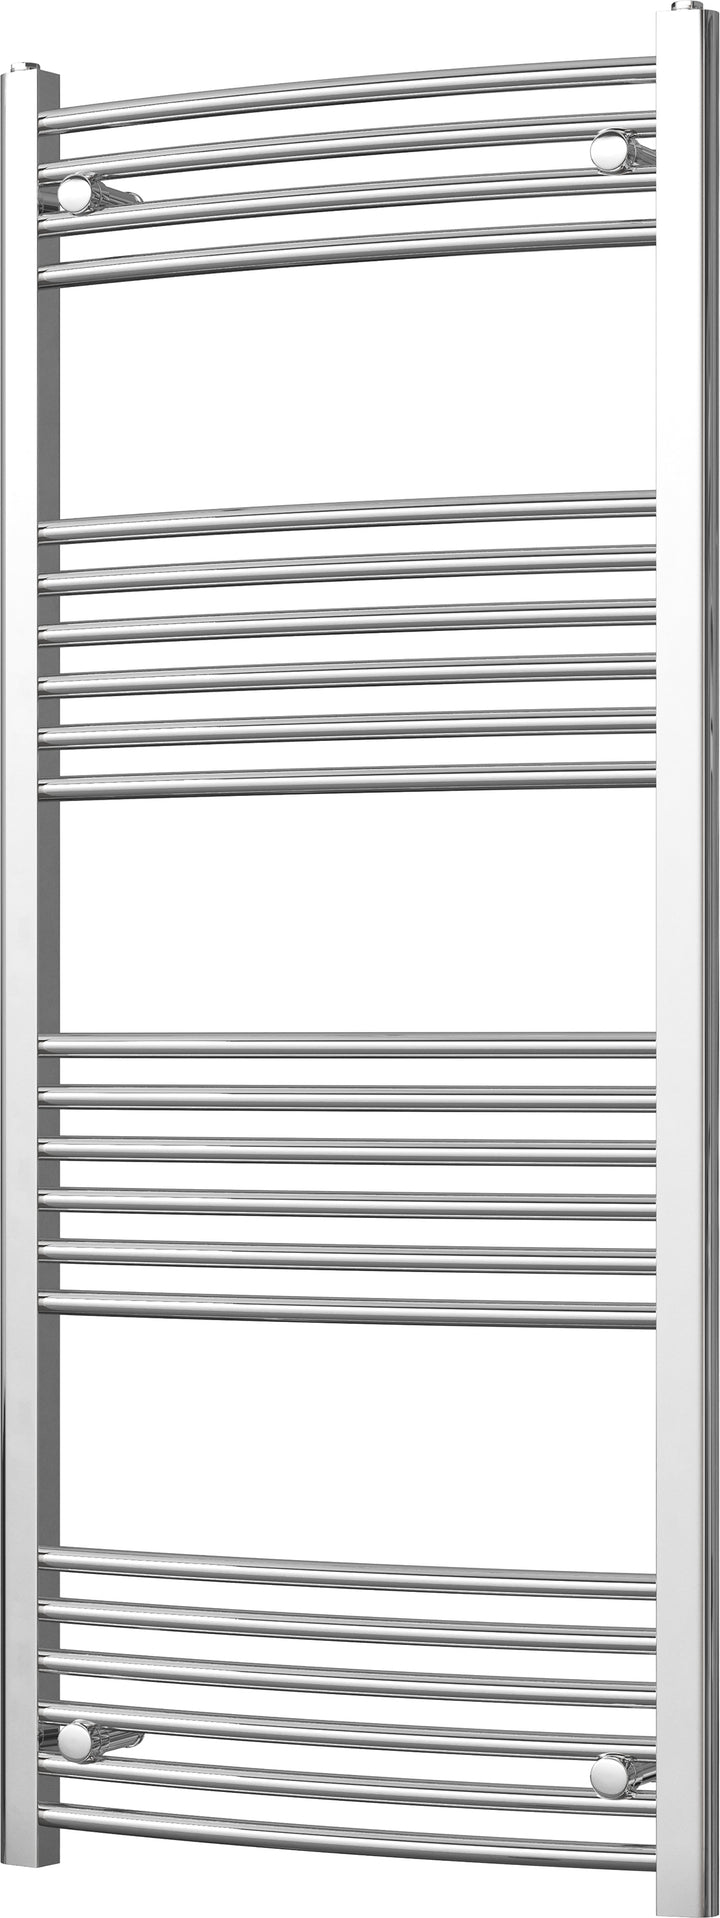 Zennor - Chrome Heated Towel Rail - H1400mm x W600mm - Curved